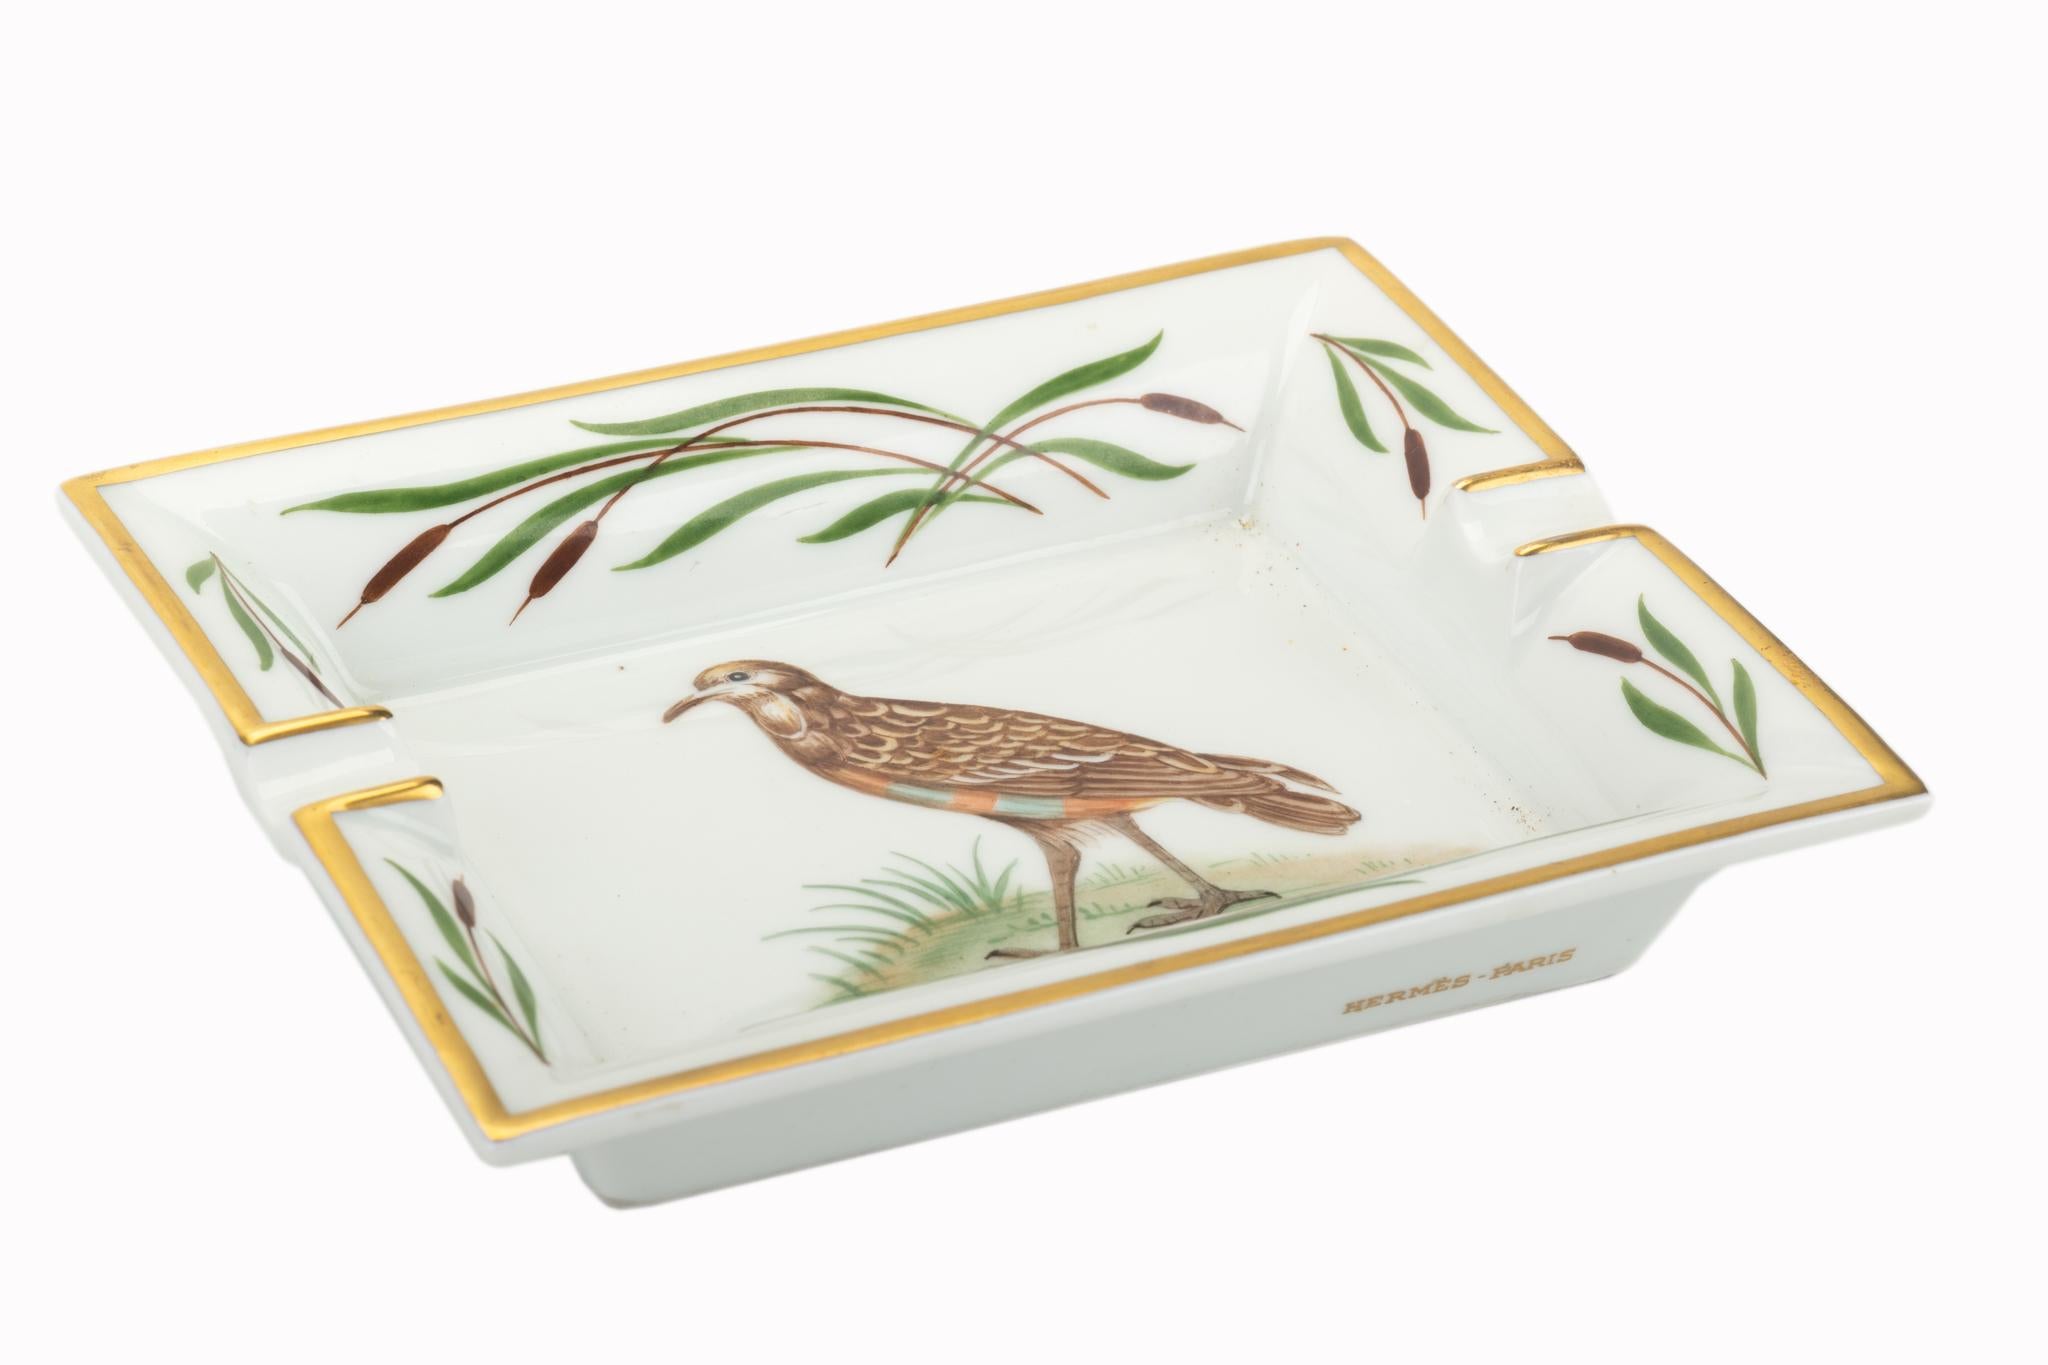 Hermes signature ashtray with bird design in brown, yellow and gold. Suede stamped bottom. Made in France.
